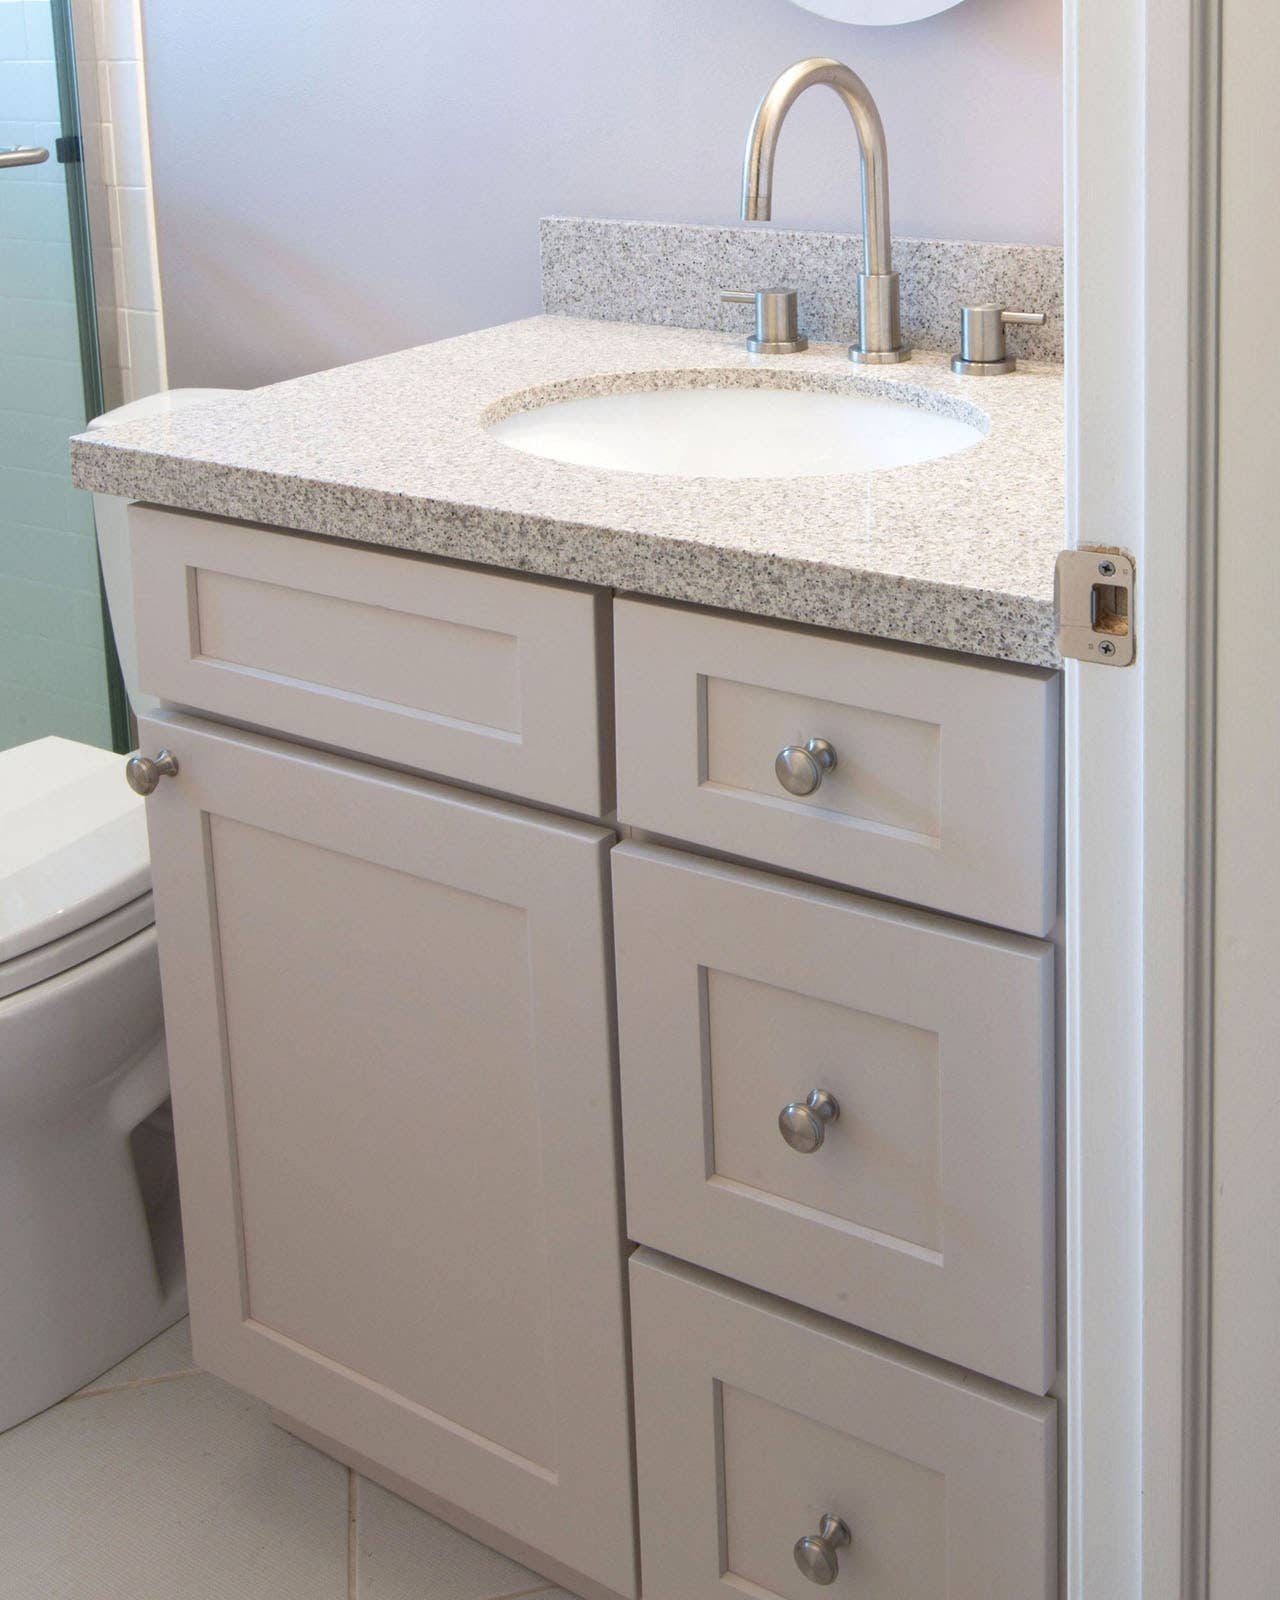 CliqStudios bath cabinets shown in Shaker White door style and finish